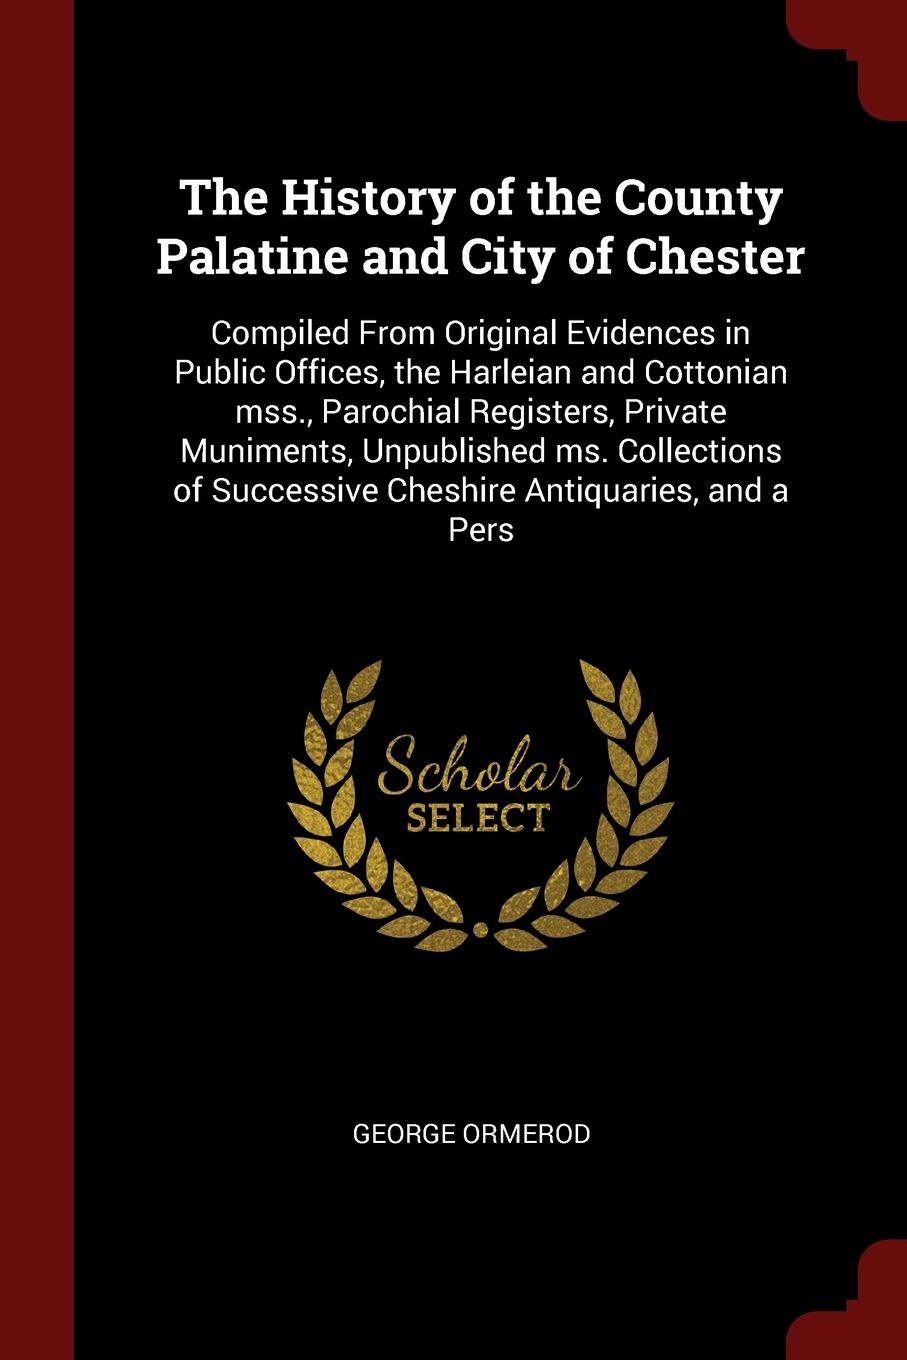 The History of the County Palatine and City of Chester. Compiled From Original Evidences in Public Offices, the Harleian and Cottonian mss., Parochial Registers, Private Muniments, Unpublished ms. Collections of Successive Cheshire Antiquaries, an...